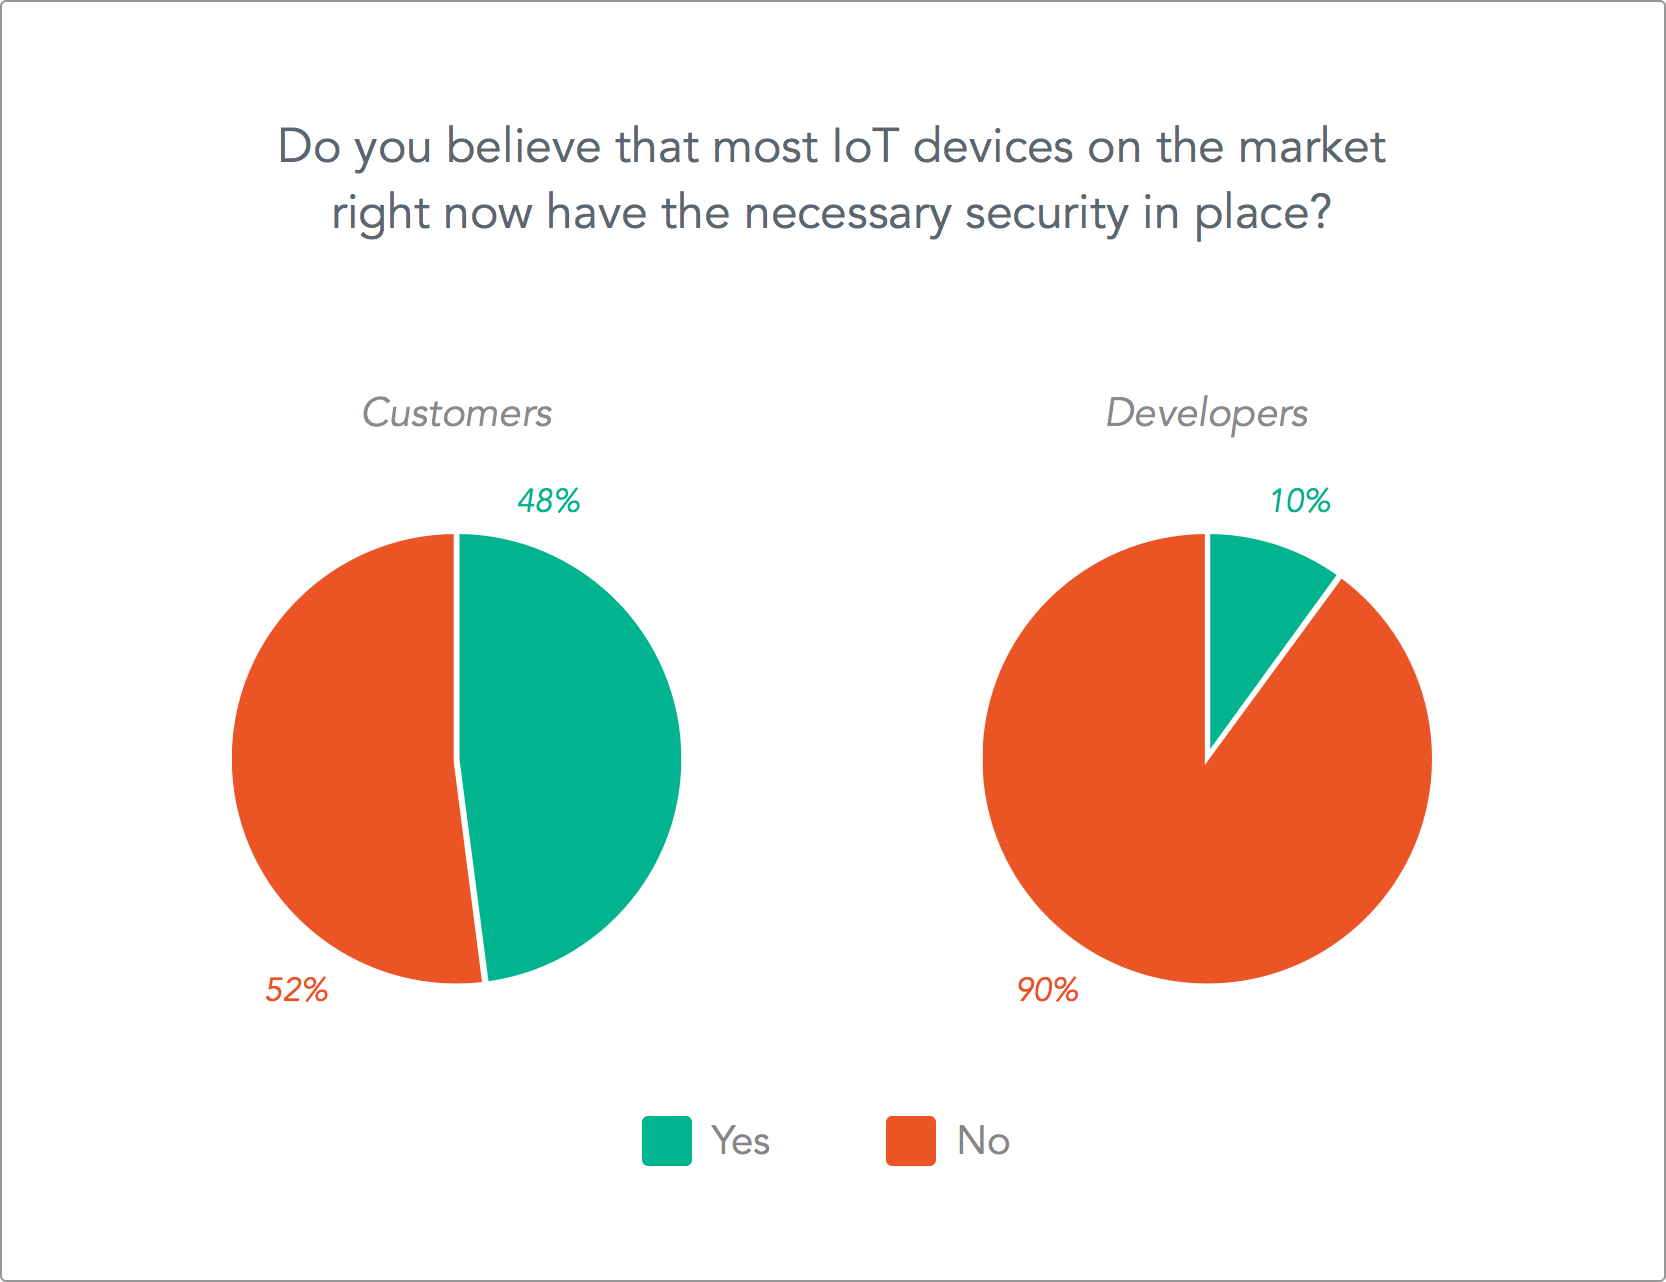 Do you believe IoT devices are secure